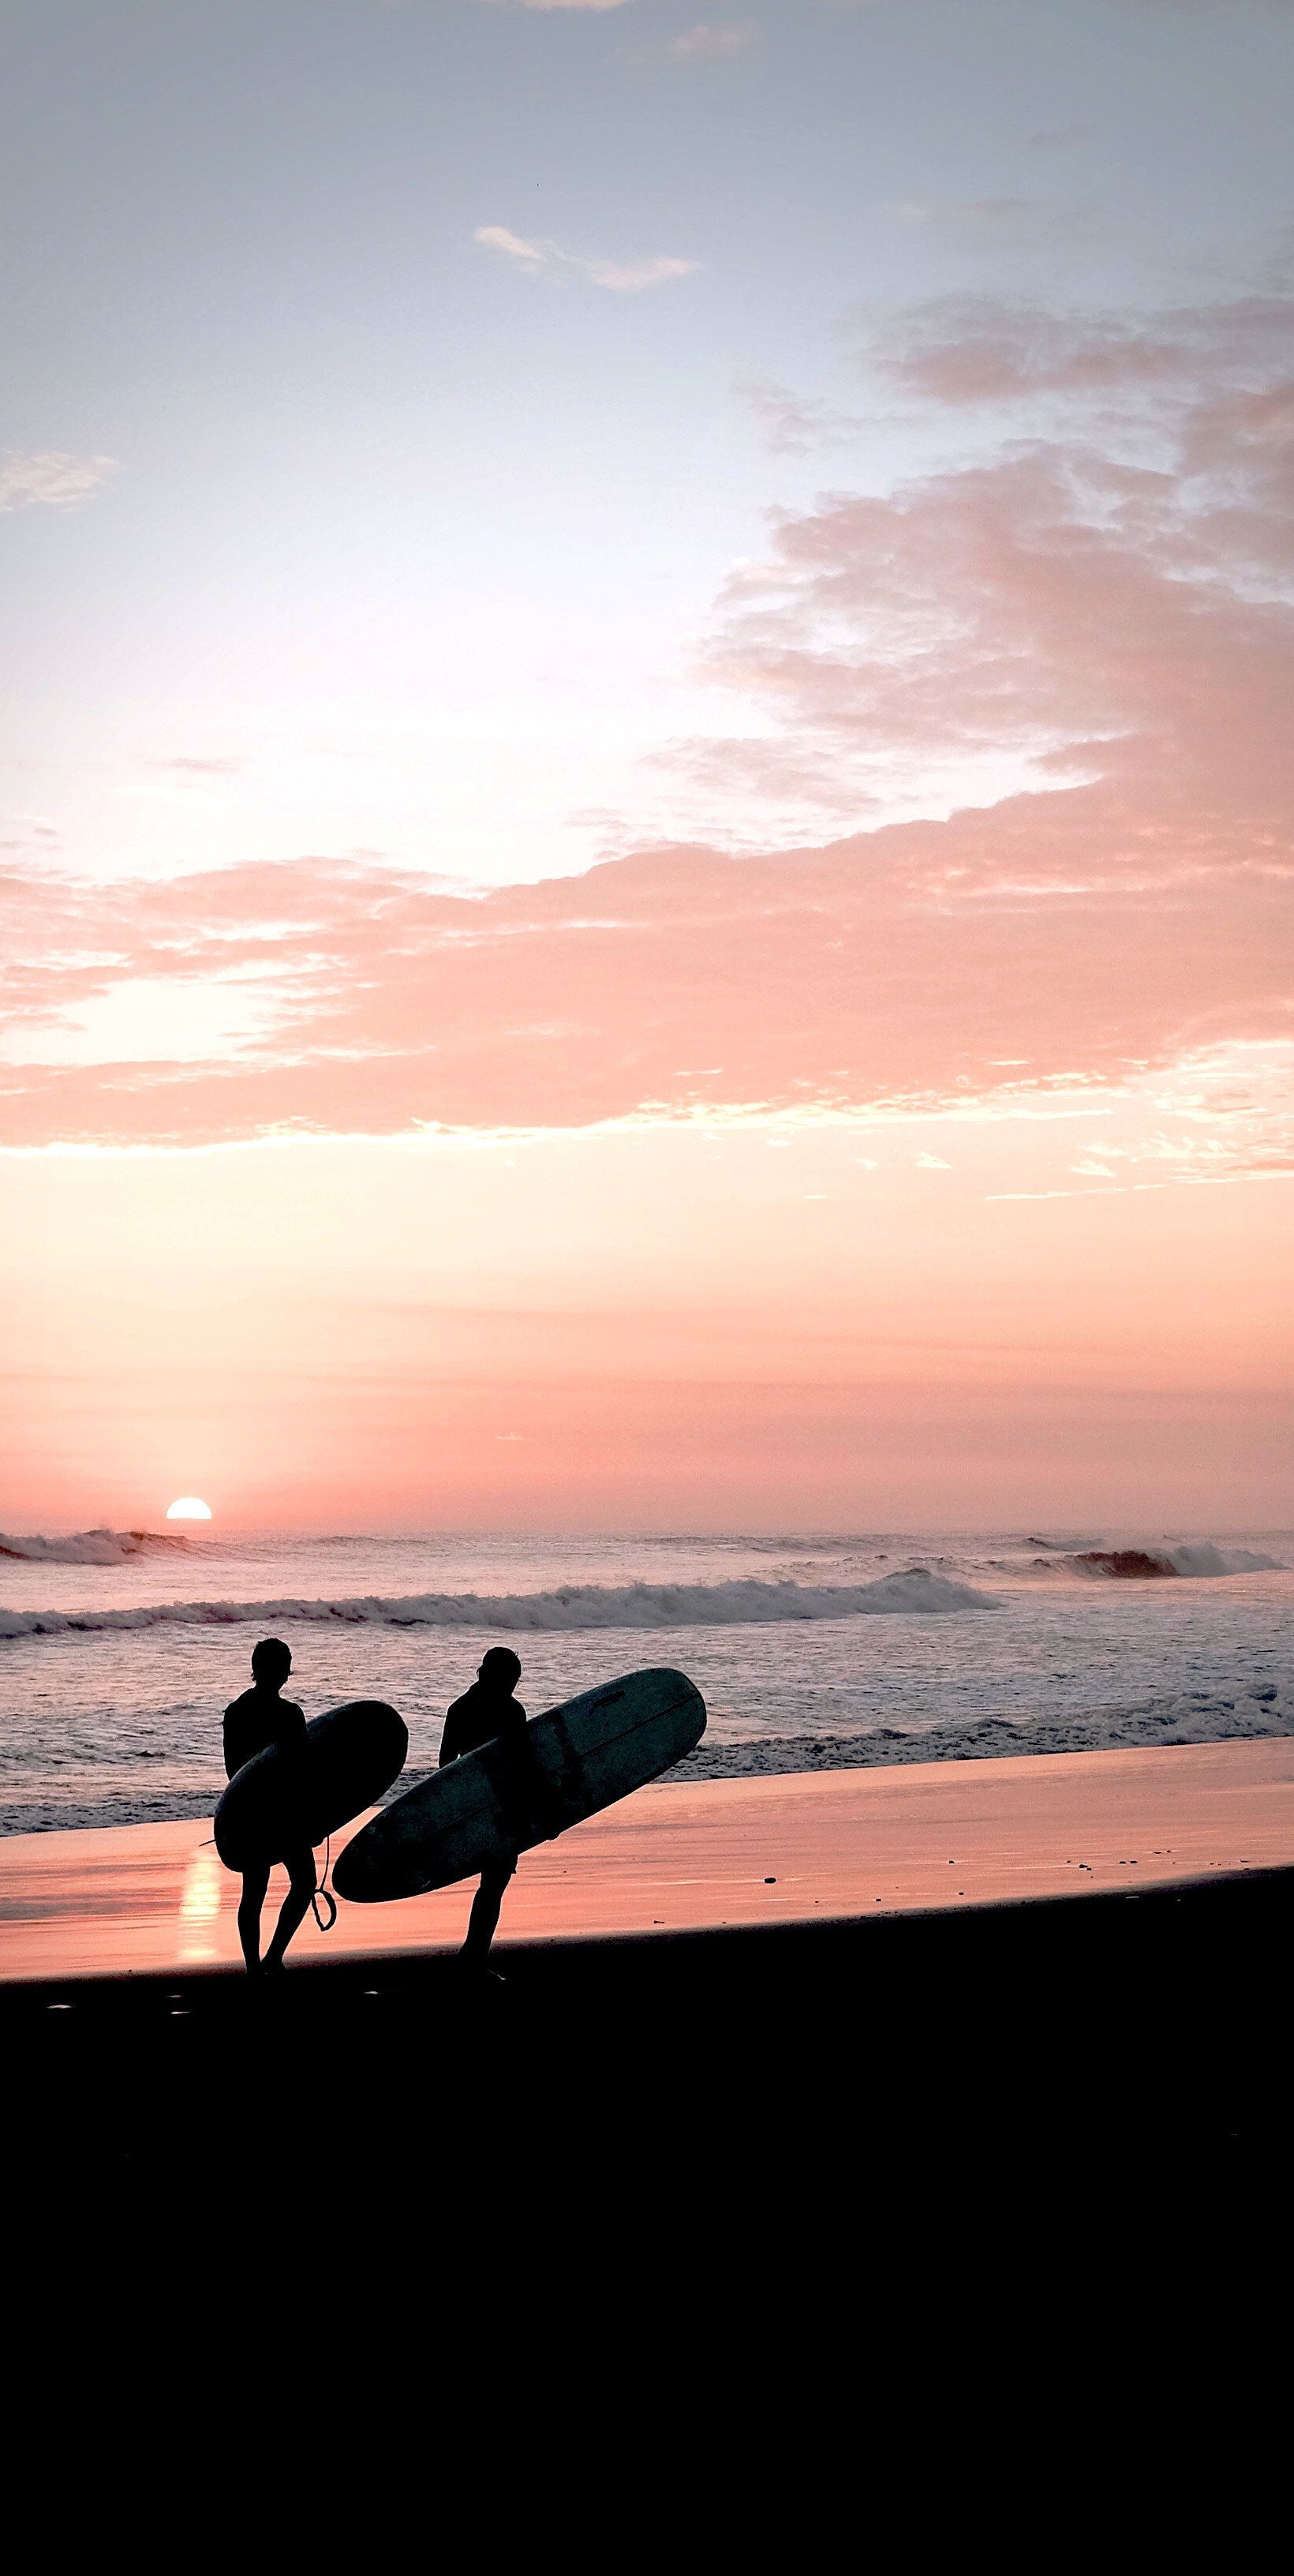 sunset #rtro #travel #rtrolifestyle #nature #water #surf #surfing #beautiful. Beach aesthetic, Surfing, Surfing picture